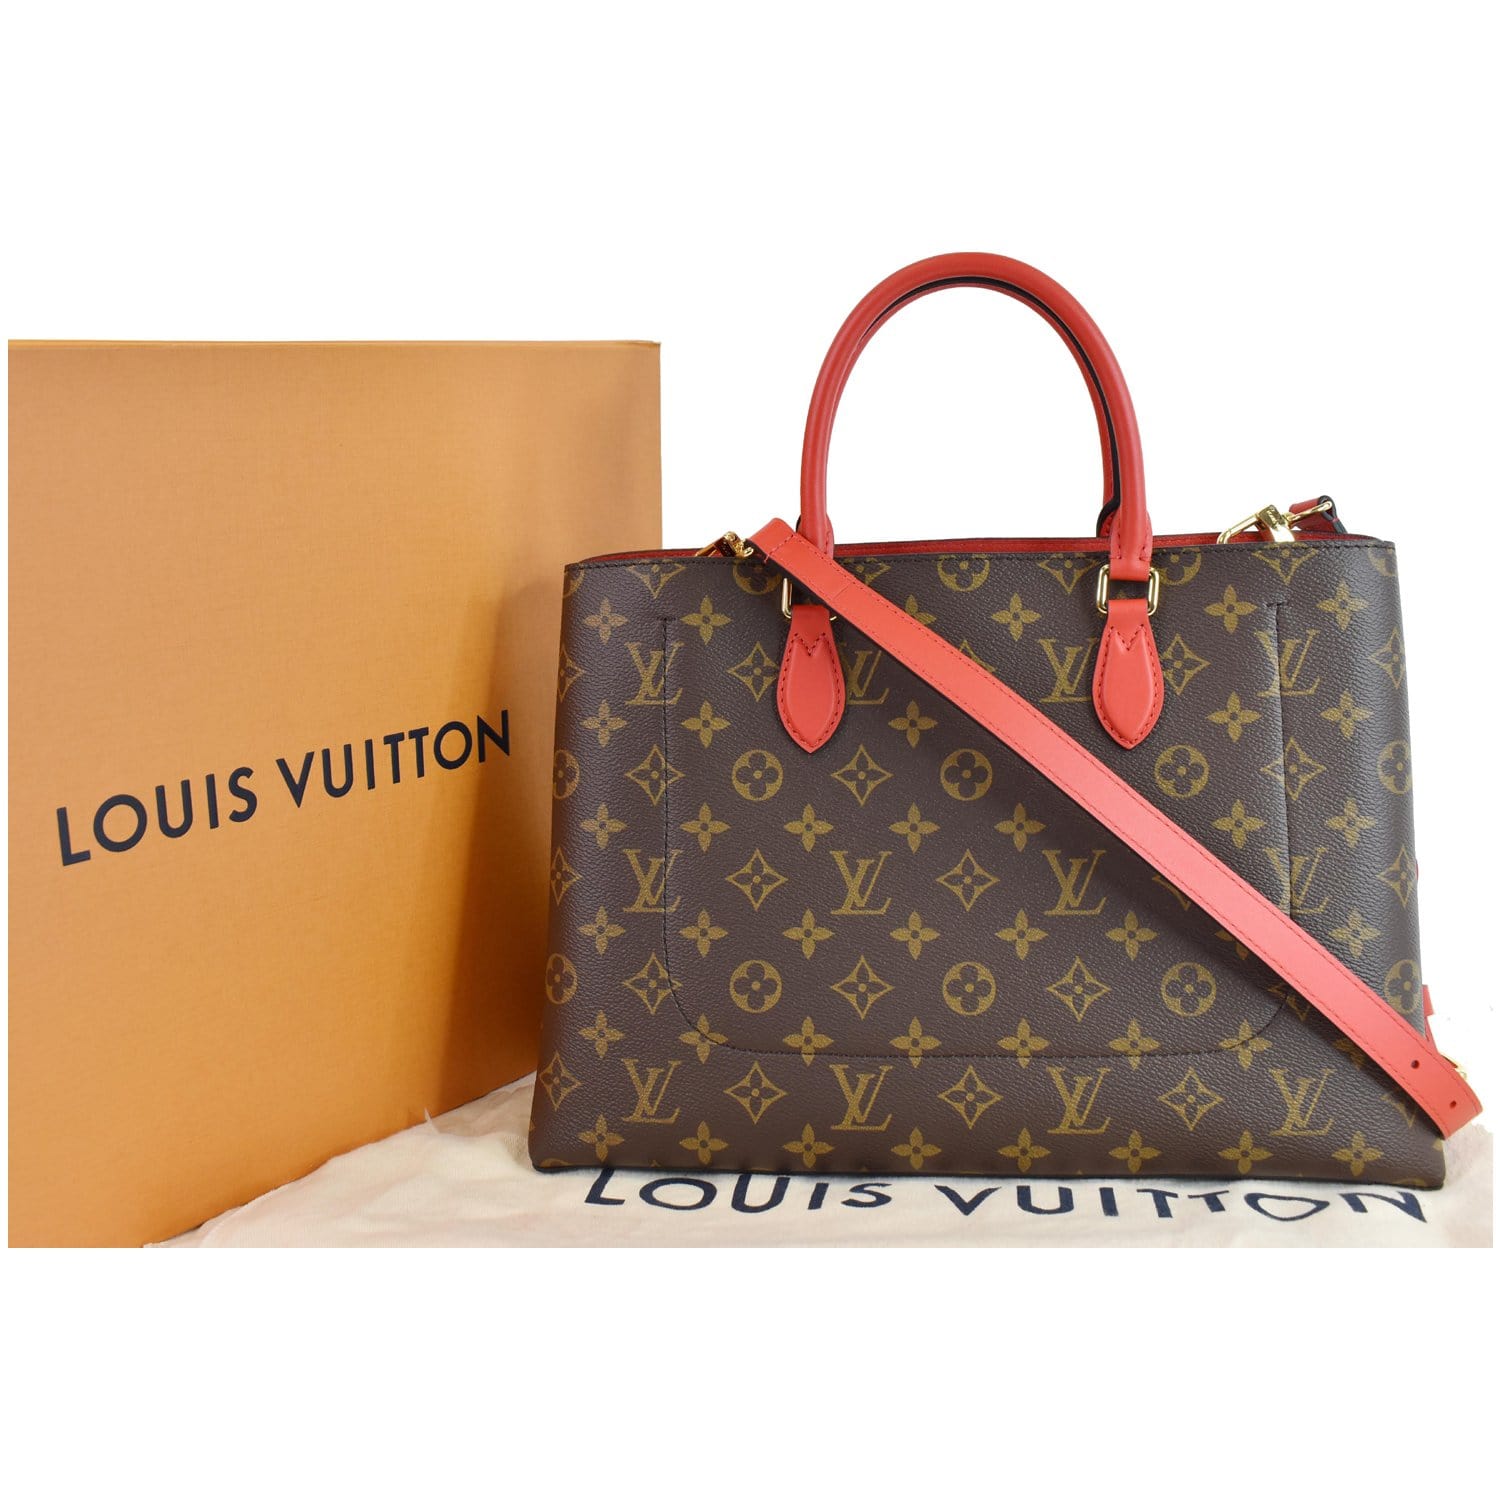 lv purse with red